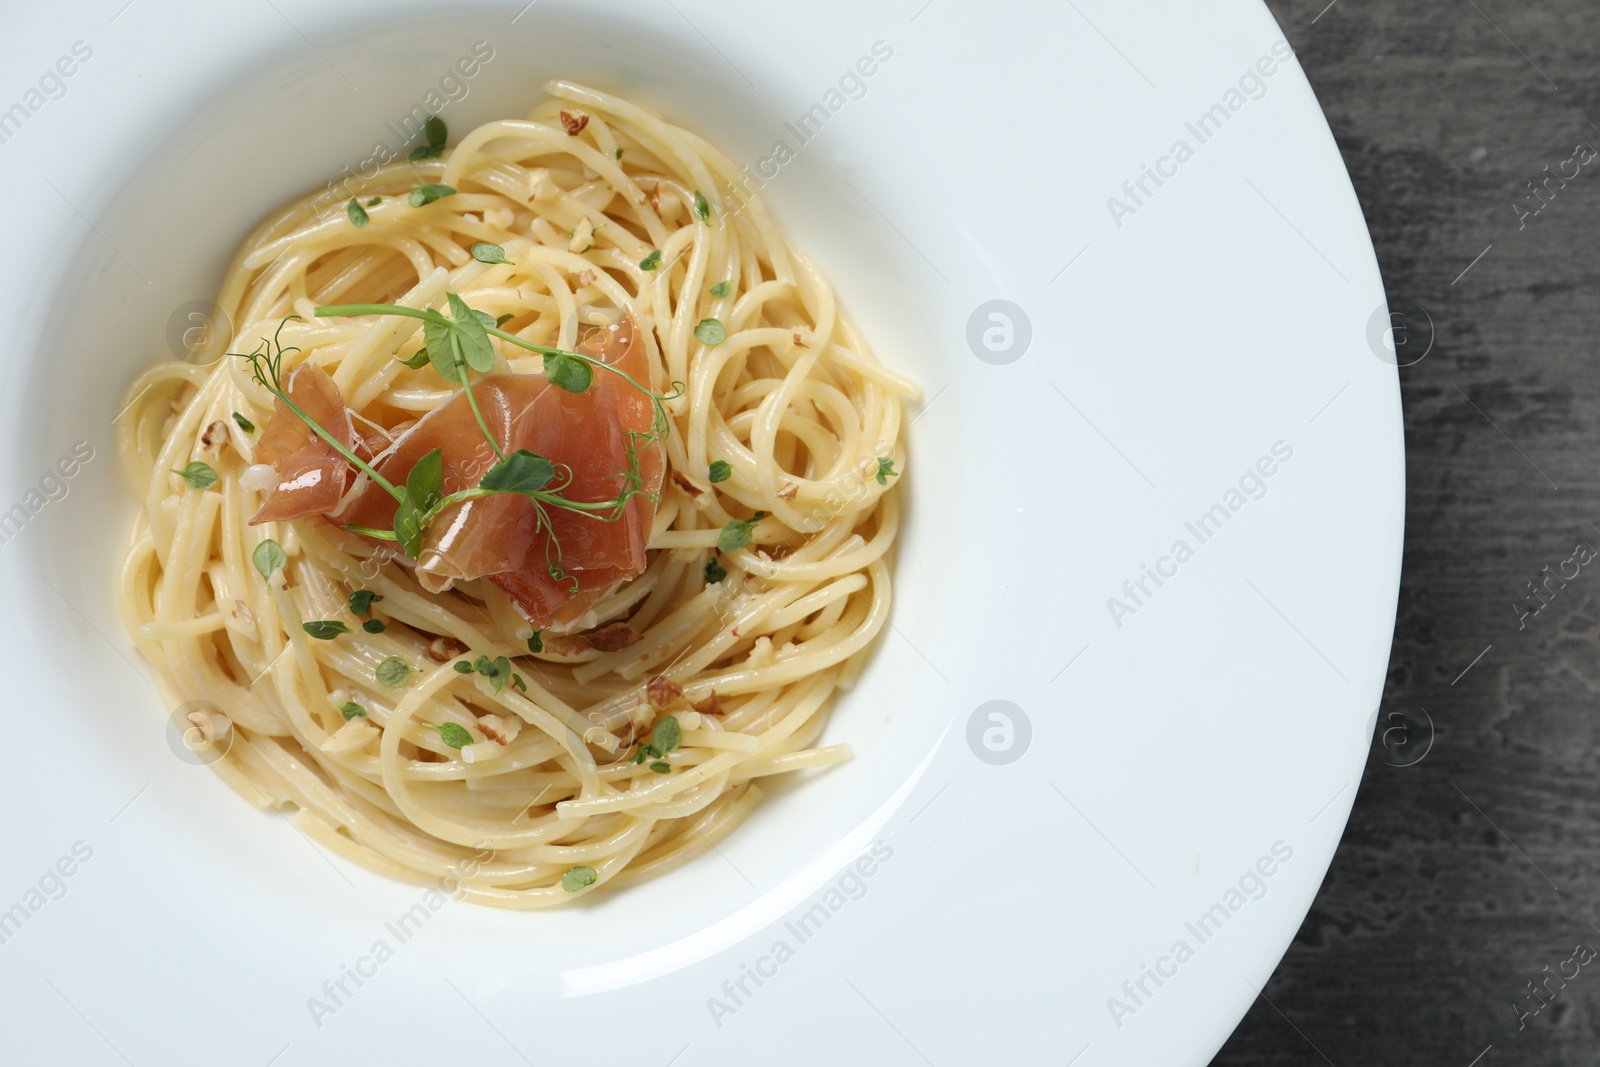 Photo of Tasty spaghetti with prosciutto and microgreens on grey textured table, top view. Exquisite presentation of pasta dish